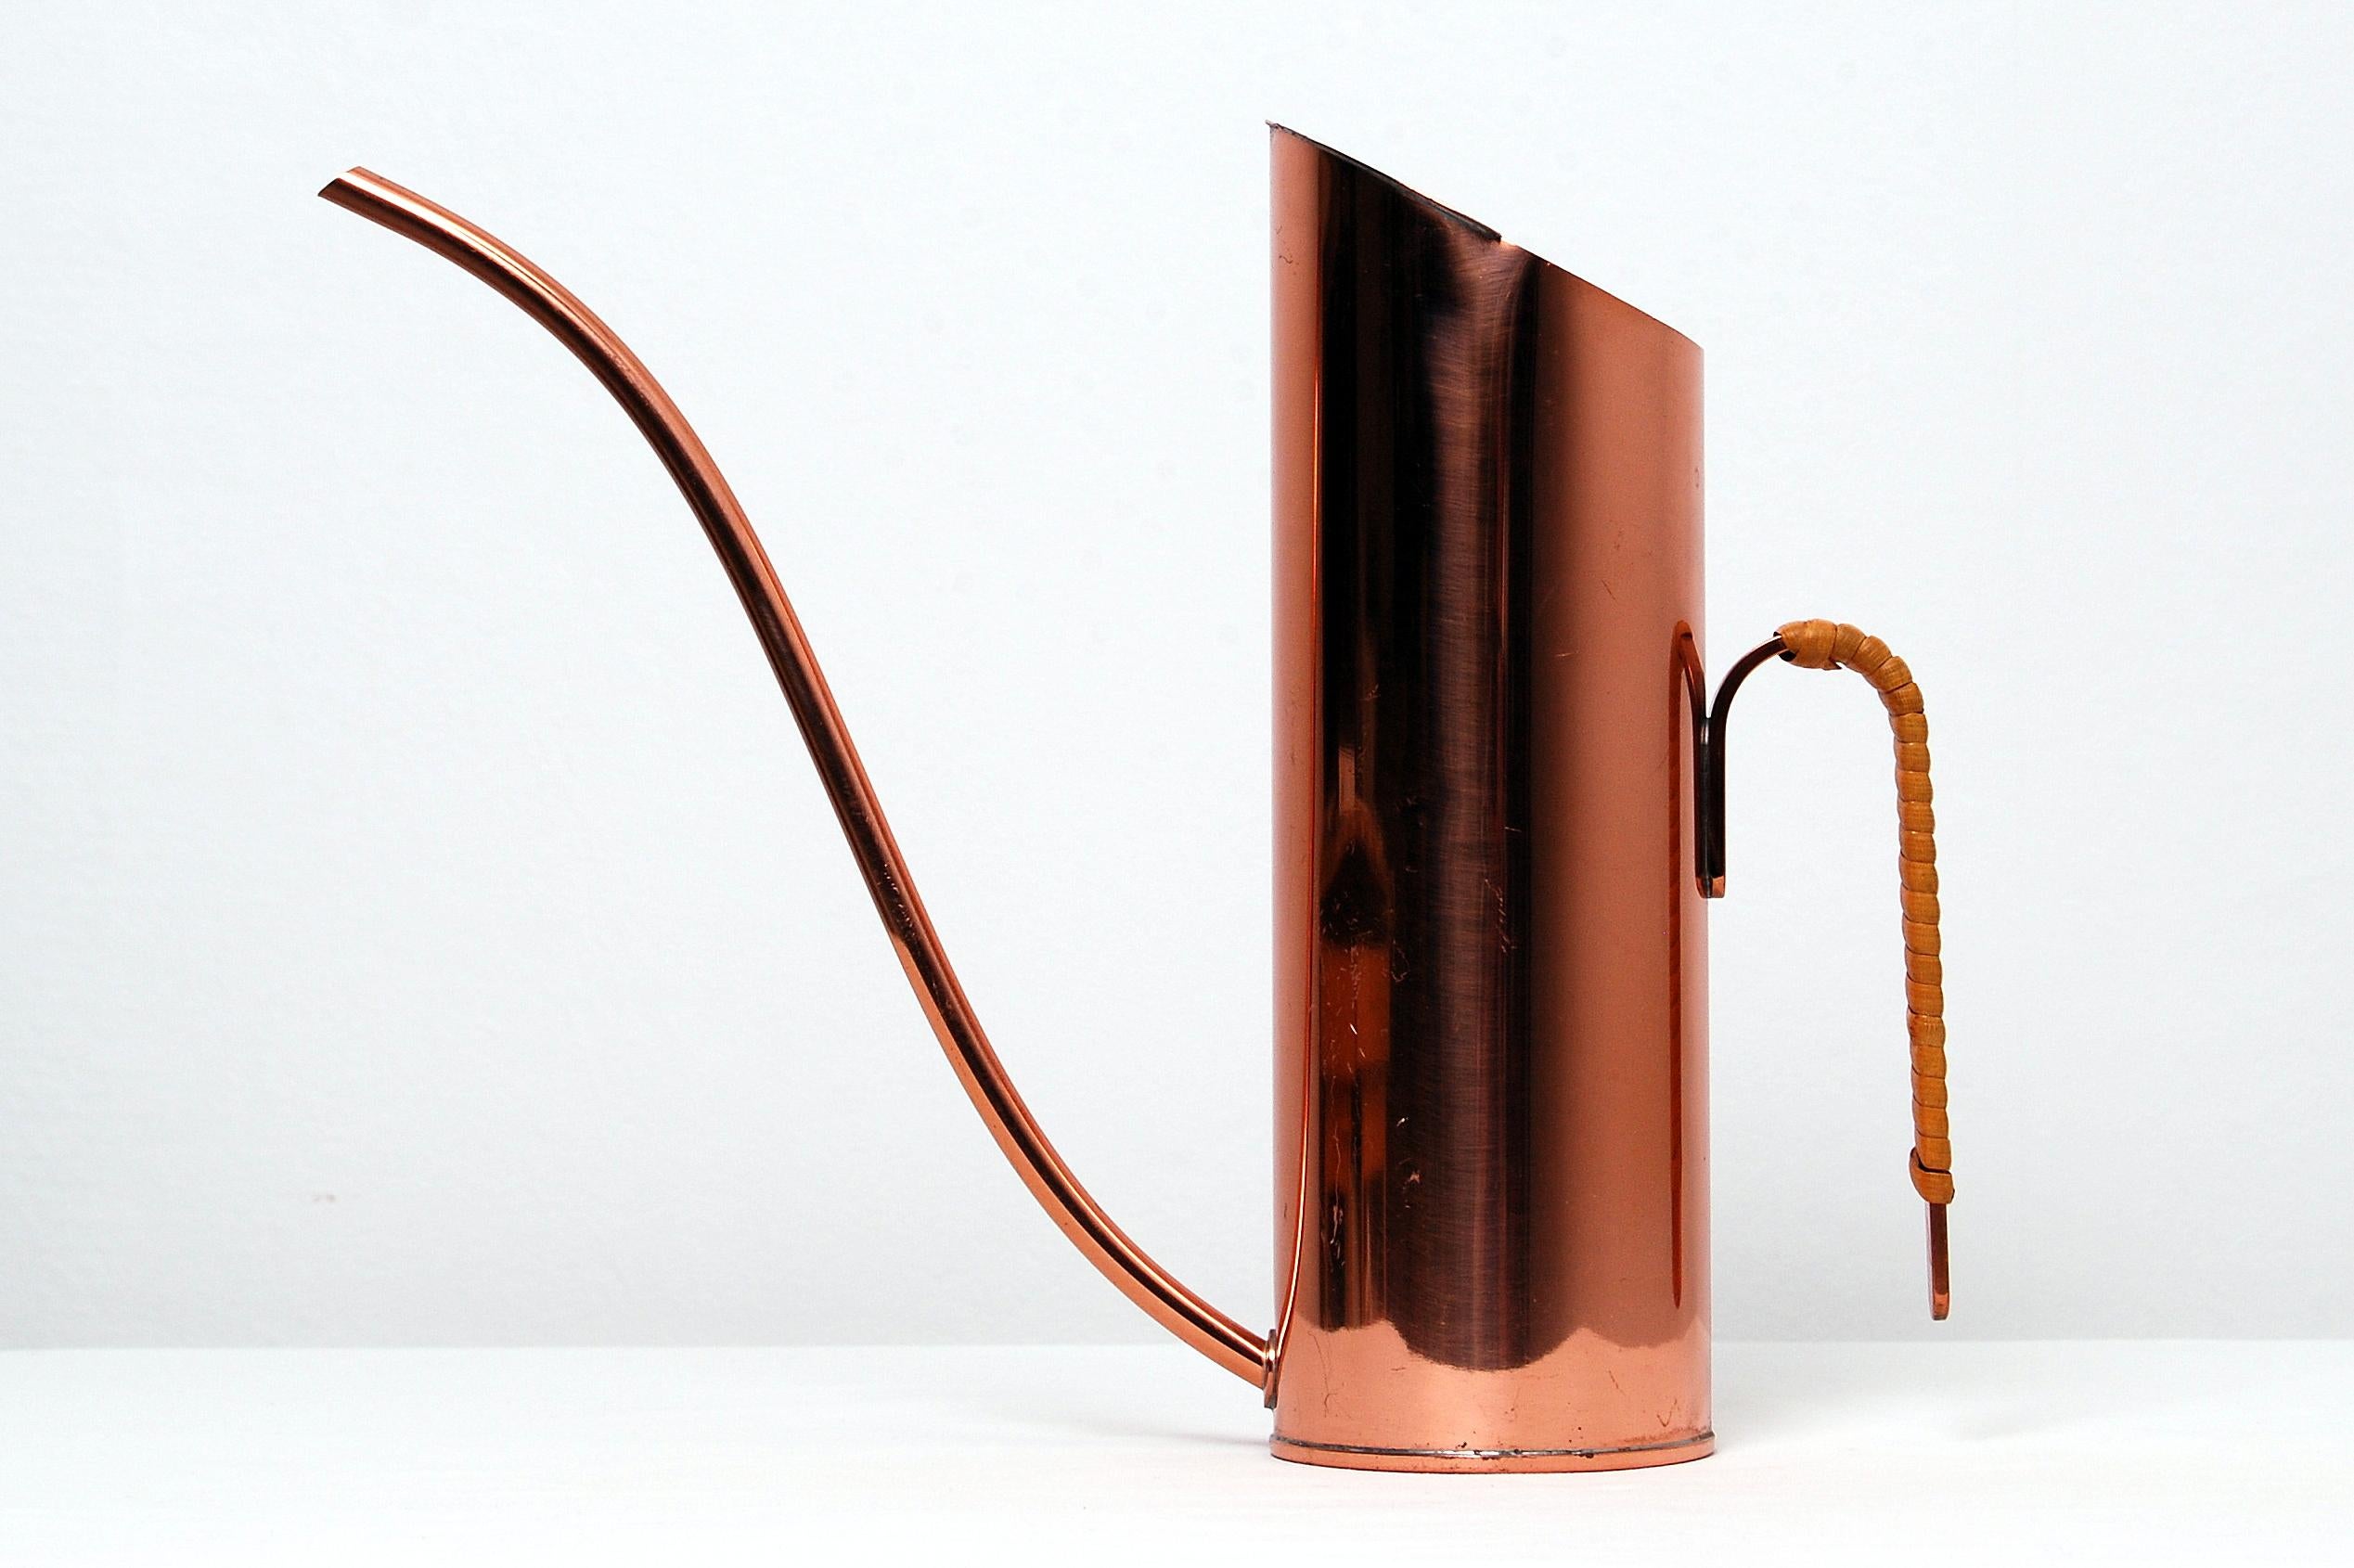 Woven Copper Watering Can by Gunnar Ander for Ystad Metall